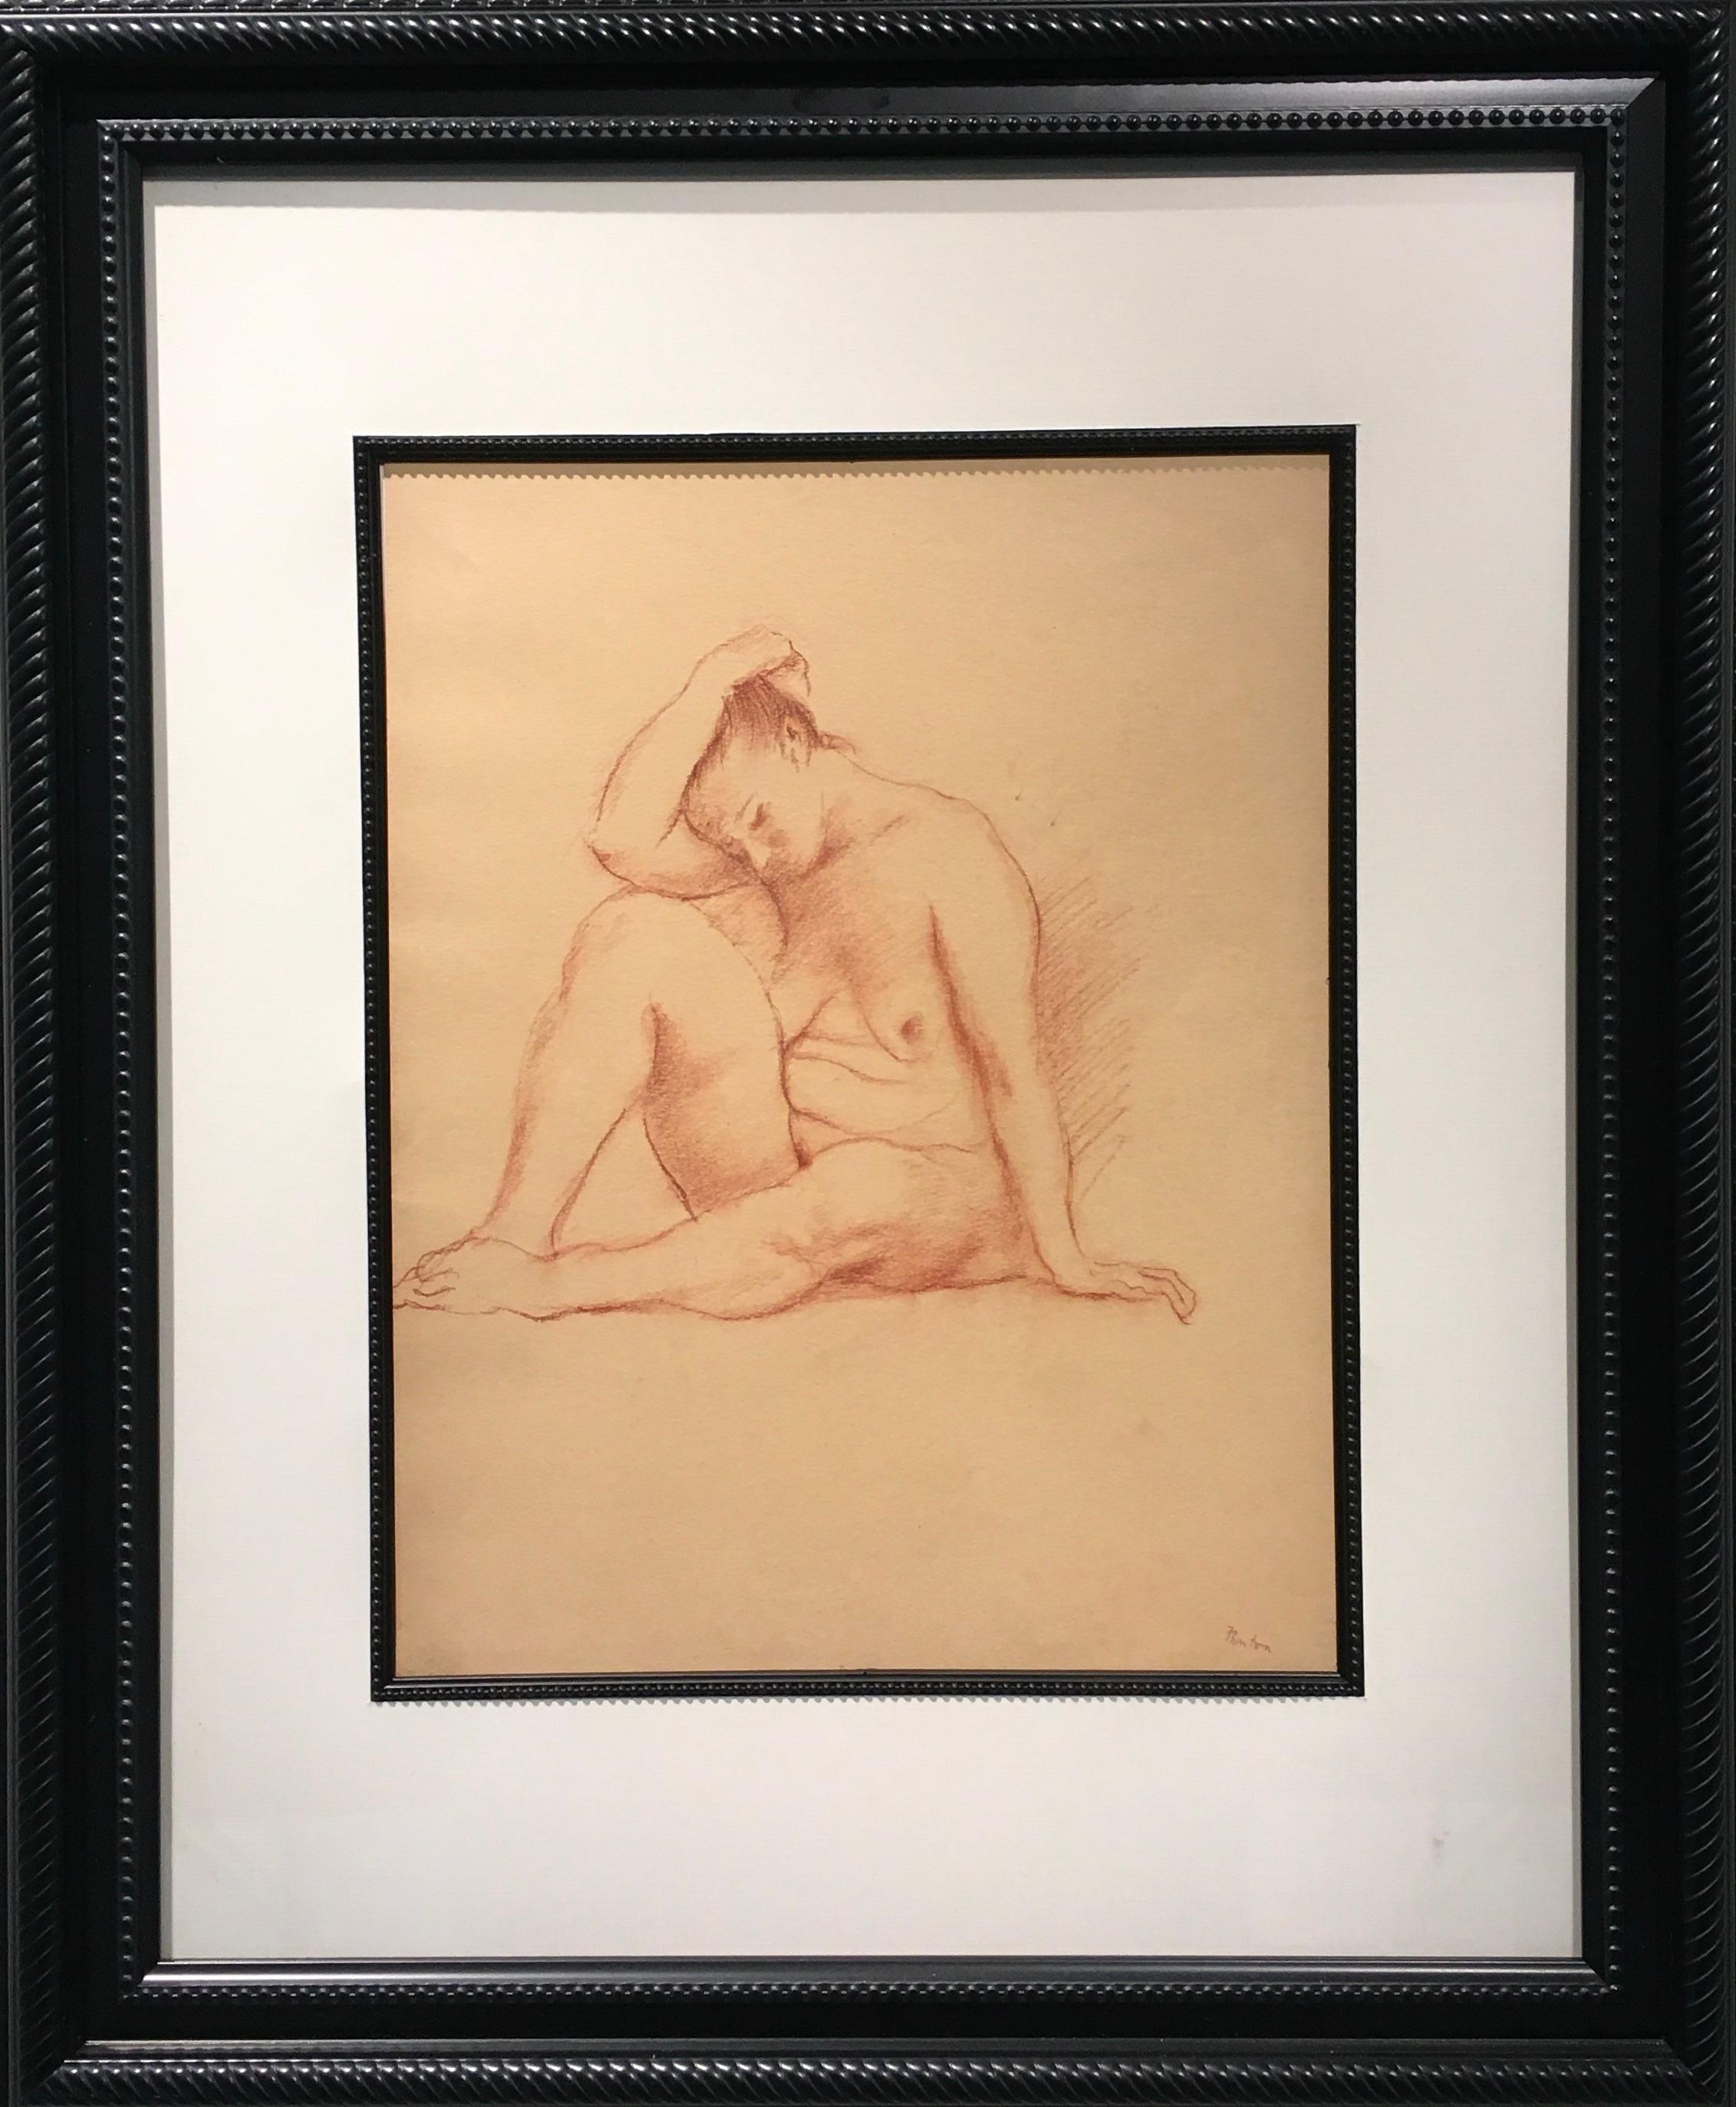 'Female Nude Figure Study, ' by John Fenton, Drawing on Paper